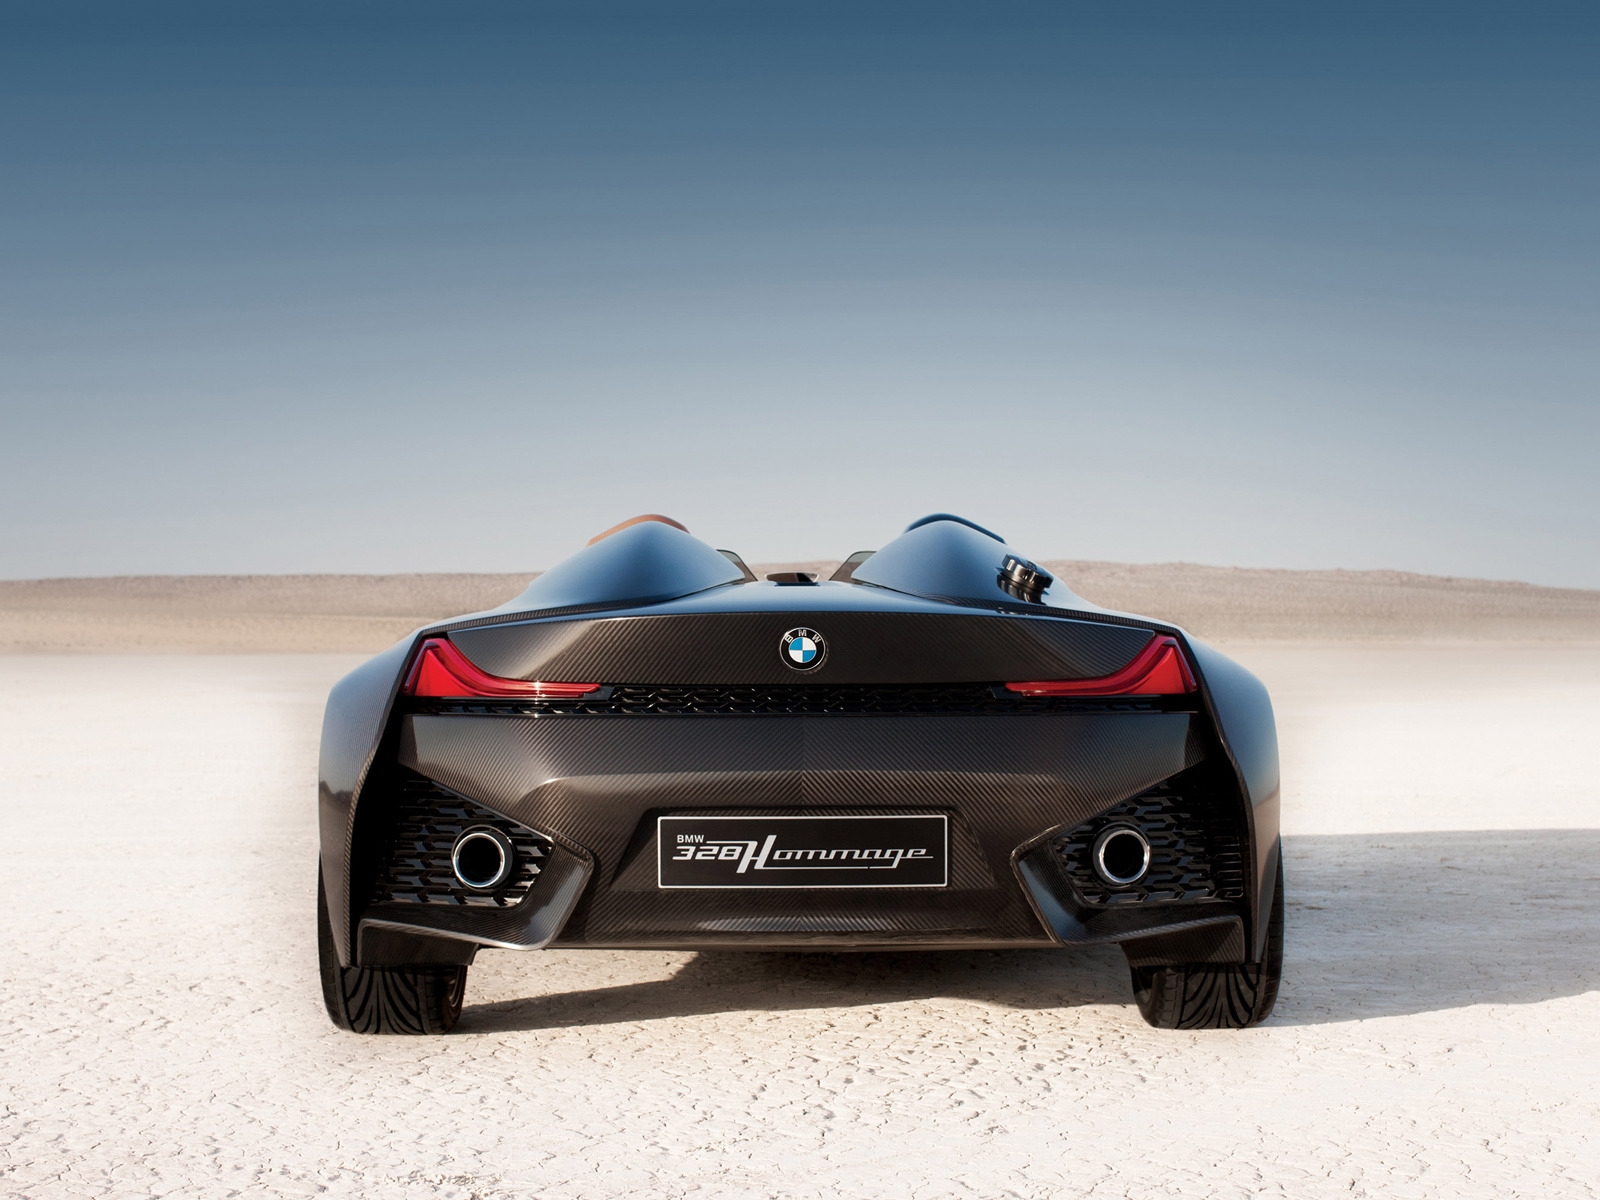 BMW 328 Hommage Rear for 1600 x 1200 resolution